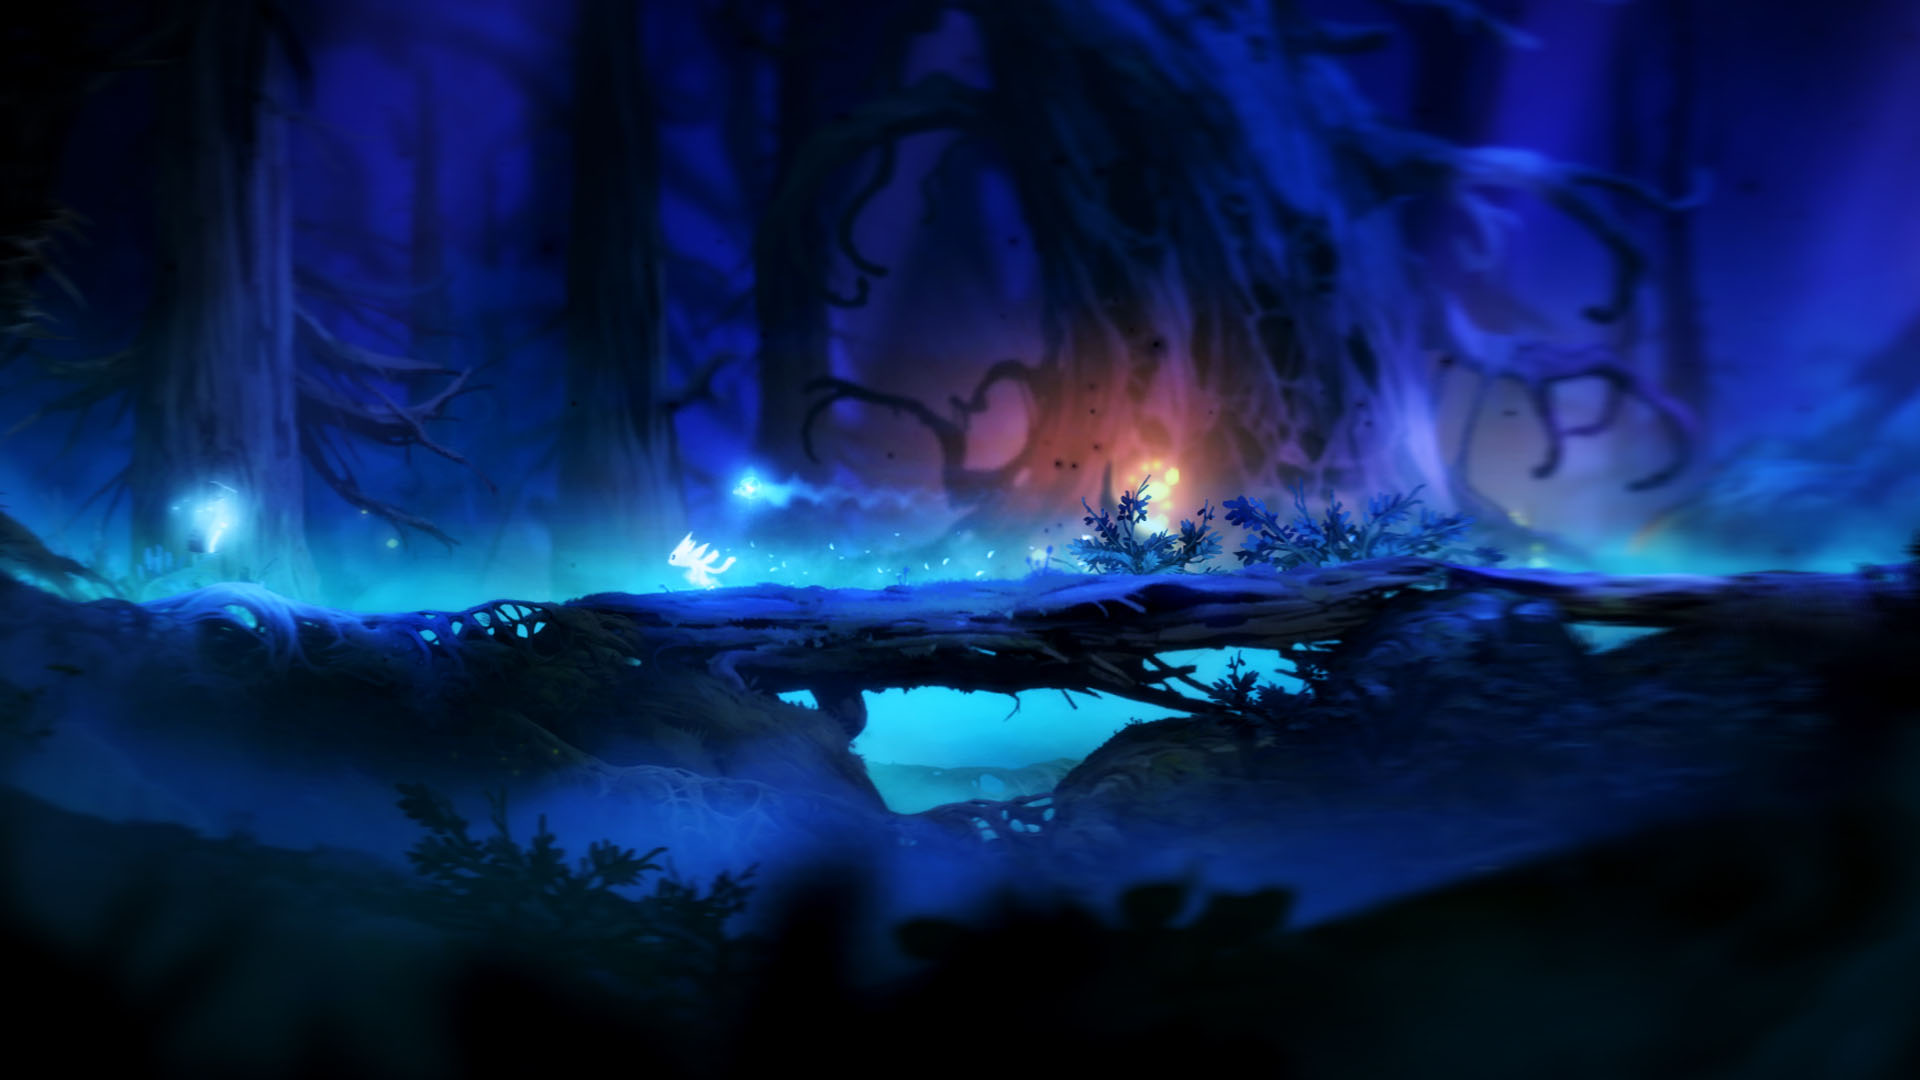 Ori And The Blind Forest Backgrounds, Compatible - PC, Mobile, Gadgets| 1920x1080 px